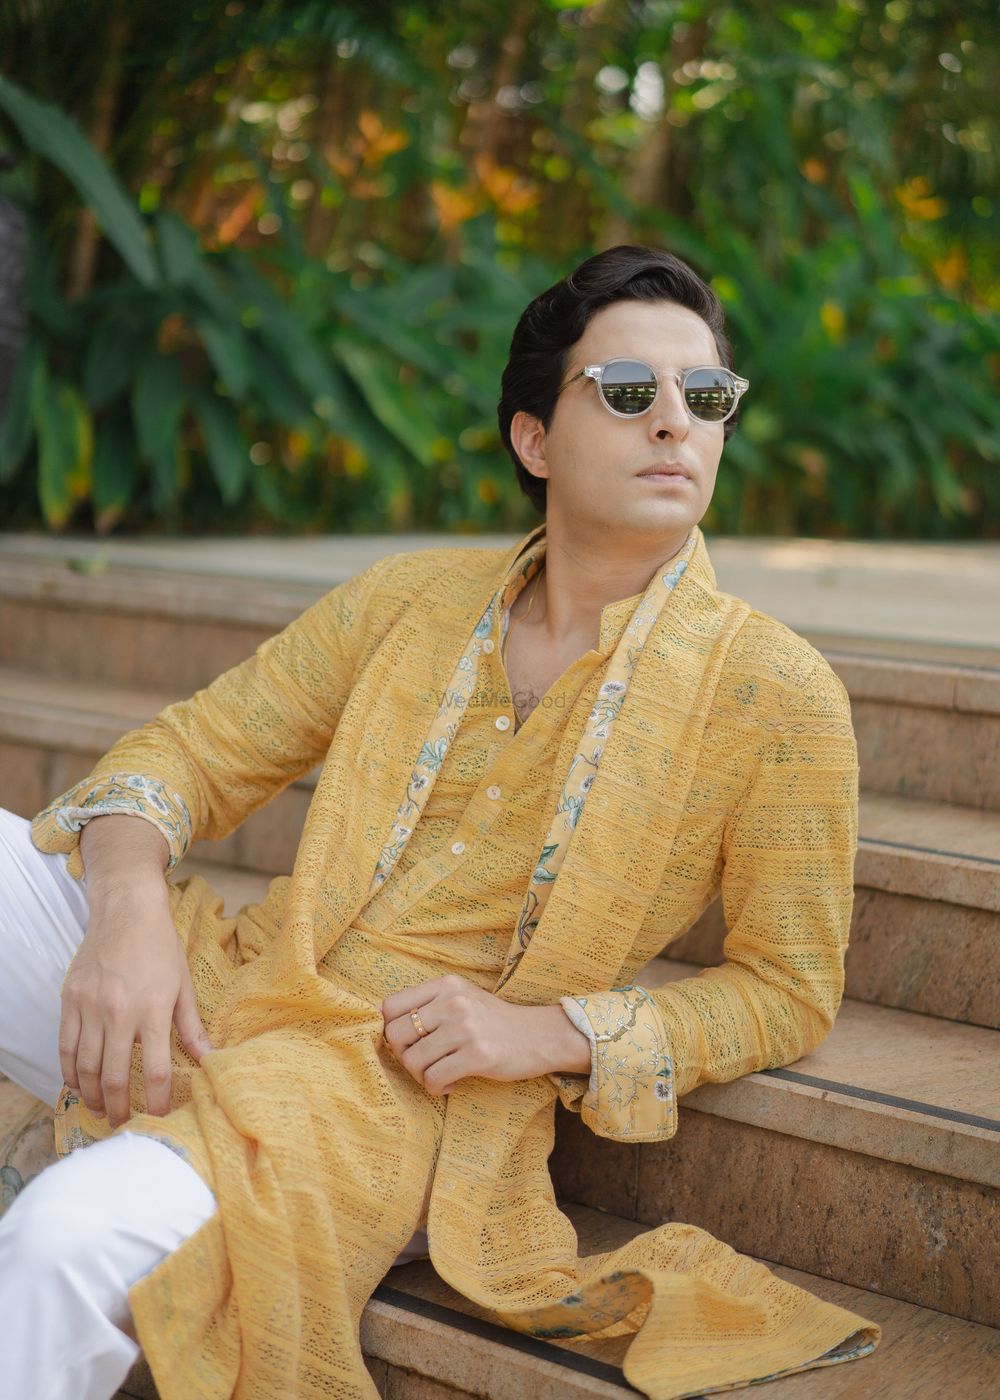 Photo of Dashing groom portrait in an ochre yellow floral kurta and sunglasses